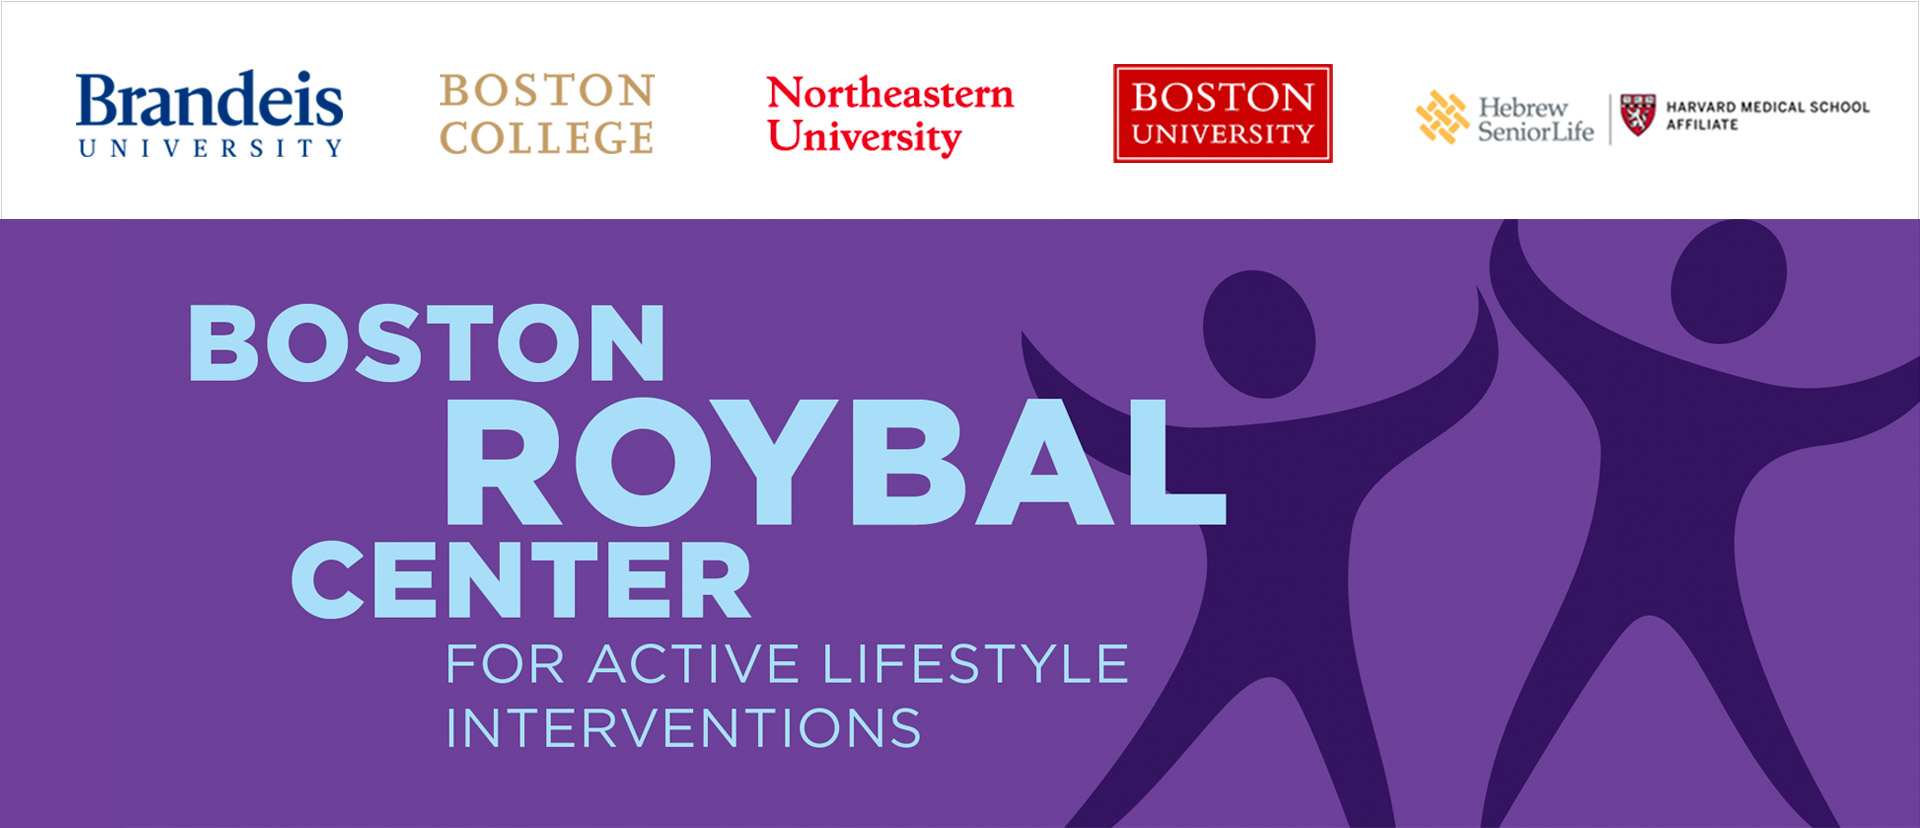 Purple figures with text: Boston Roybal Center for Active Lifestyle Interventions